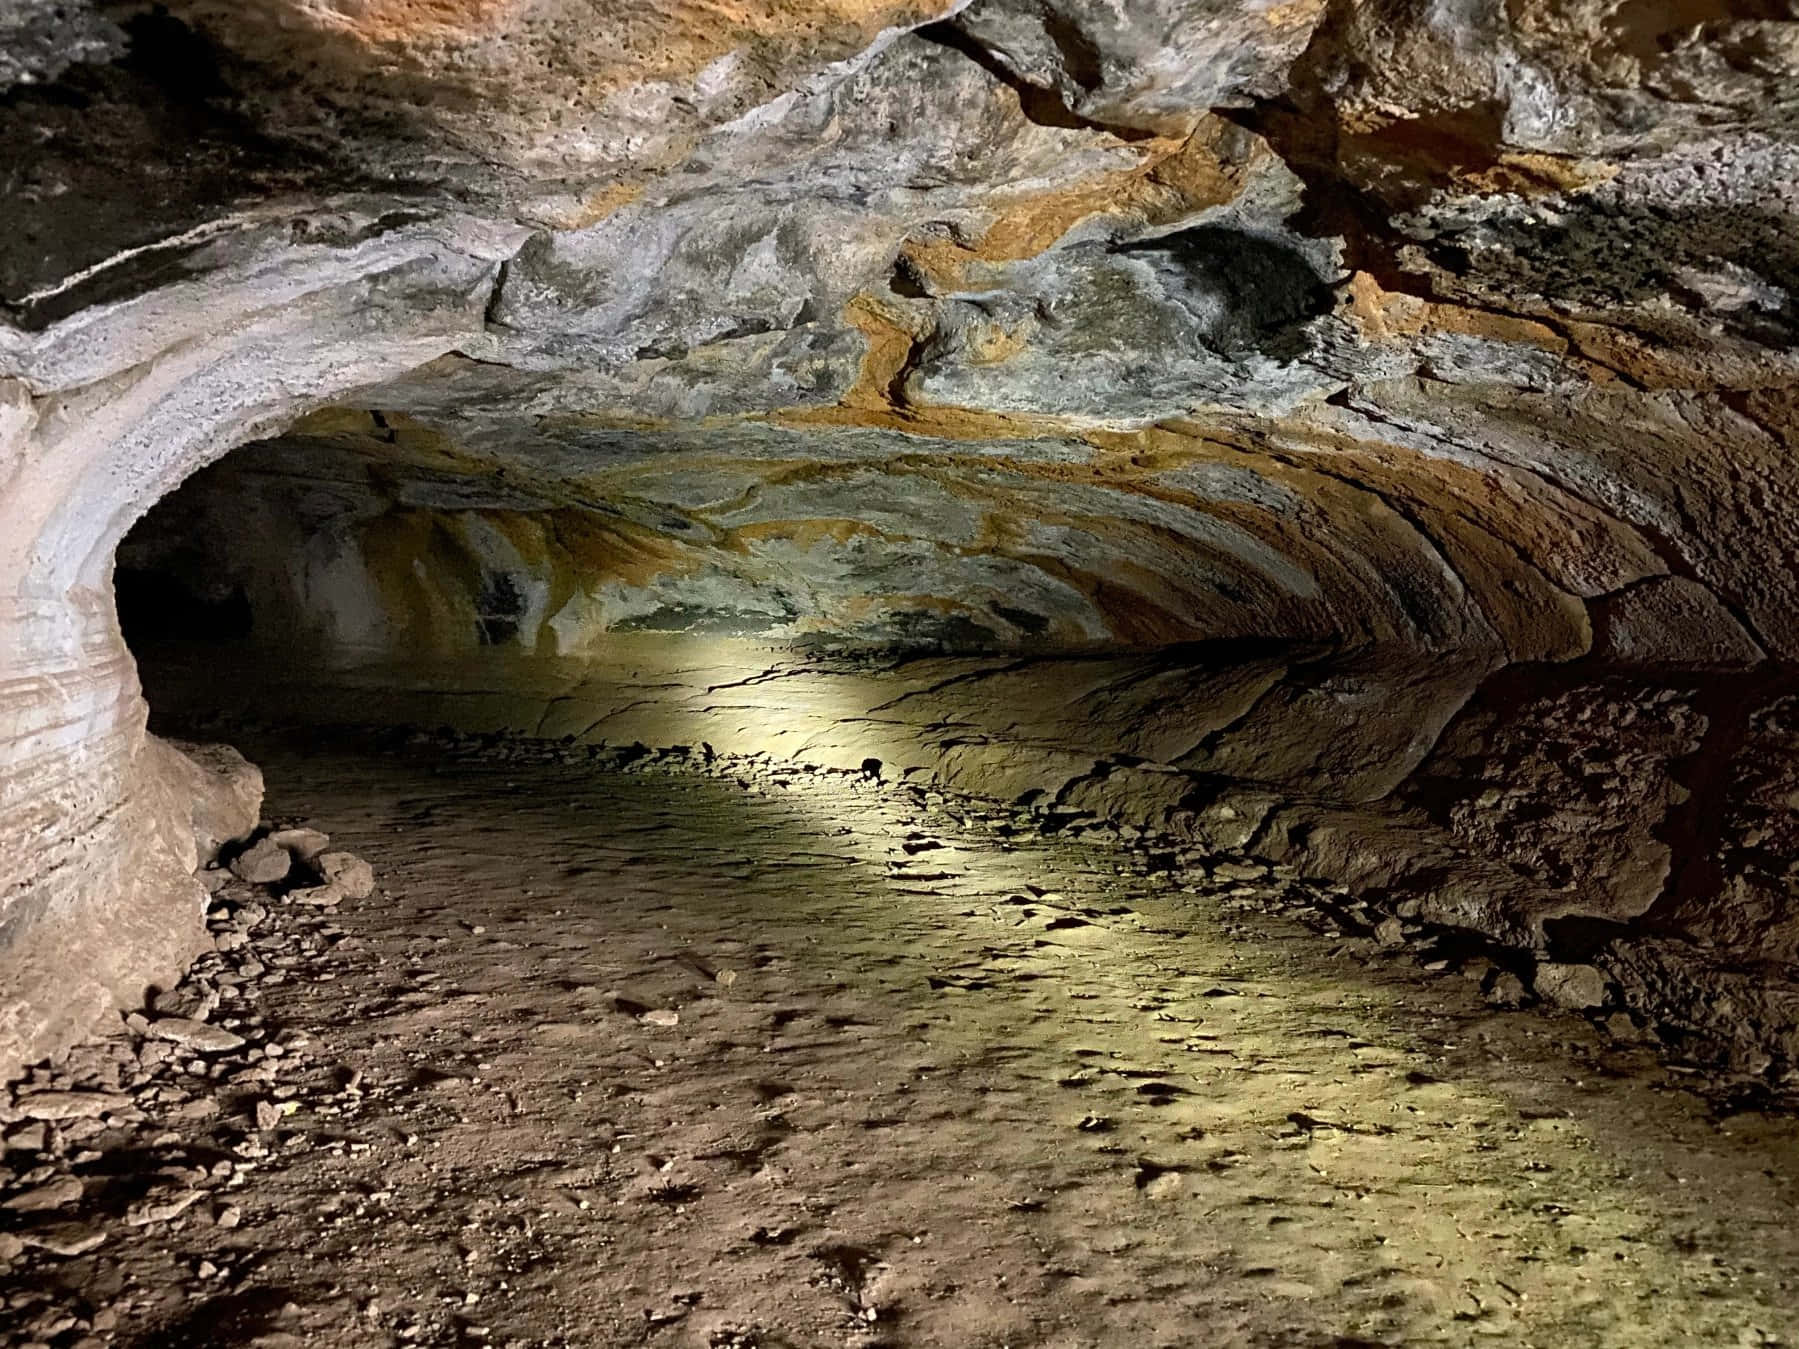 Mysterious cave entrance illuminated by sunlight